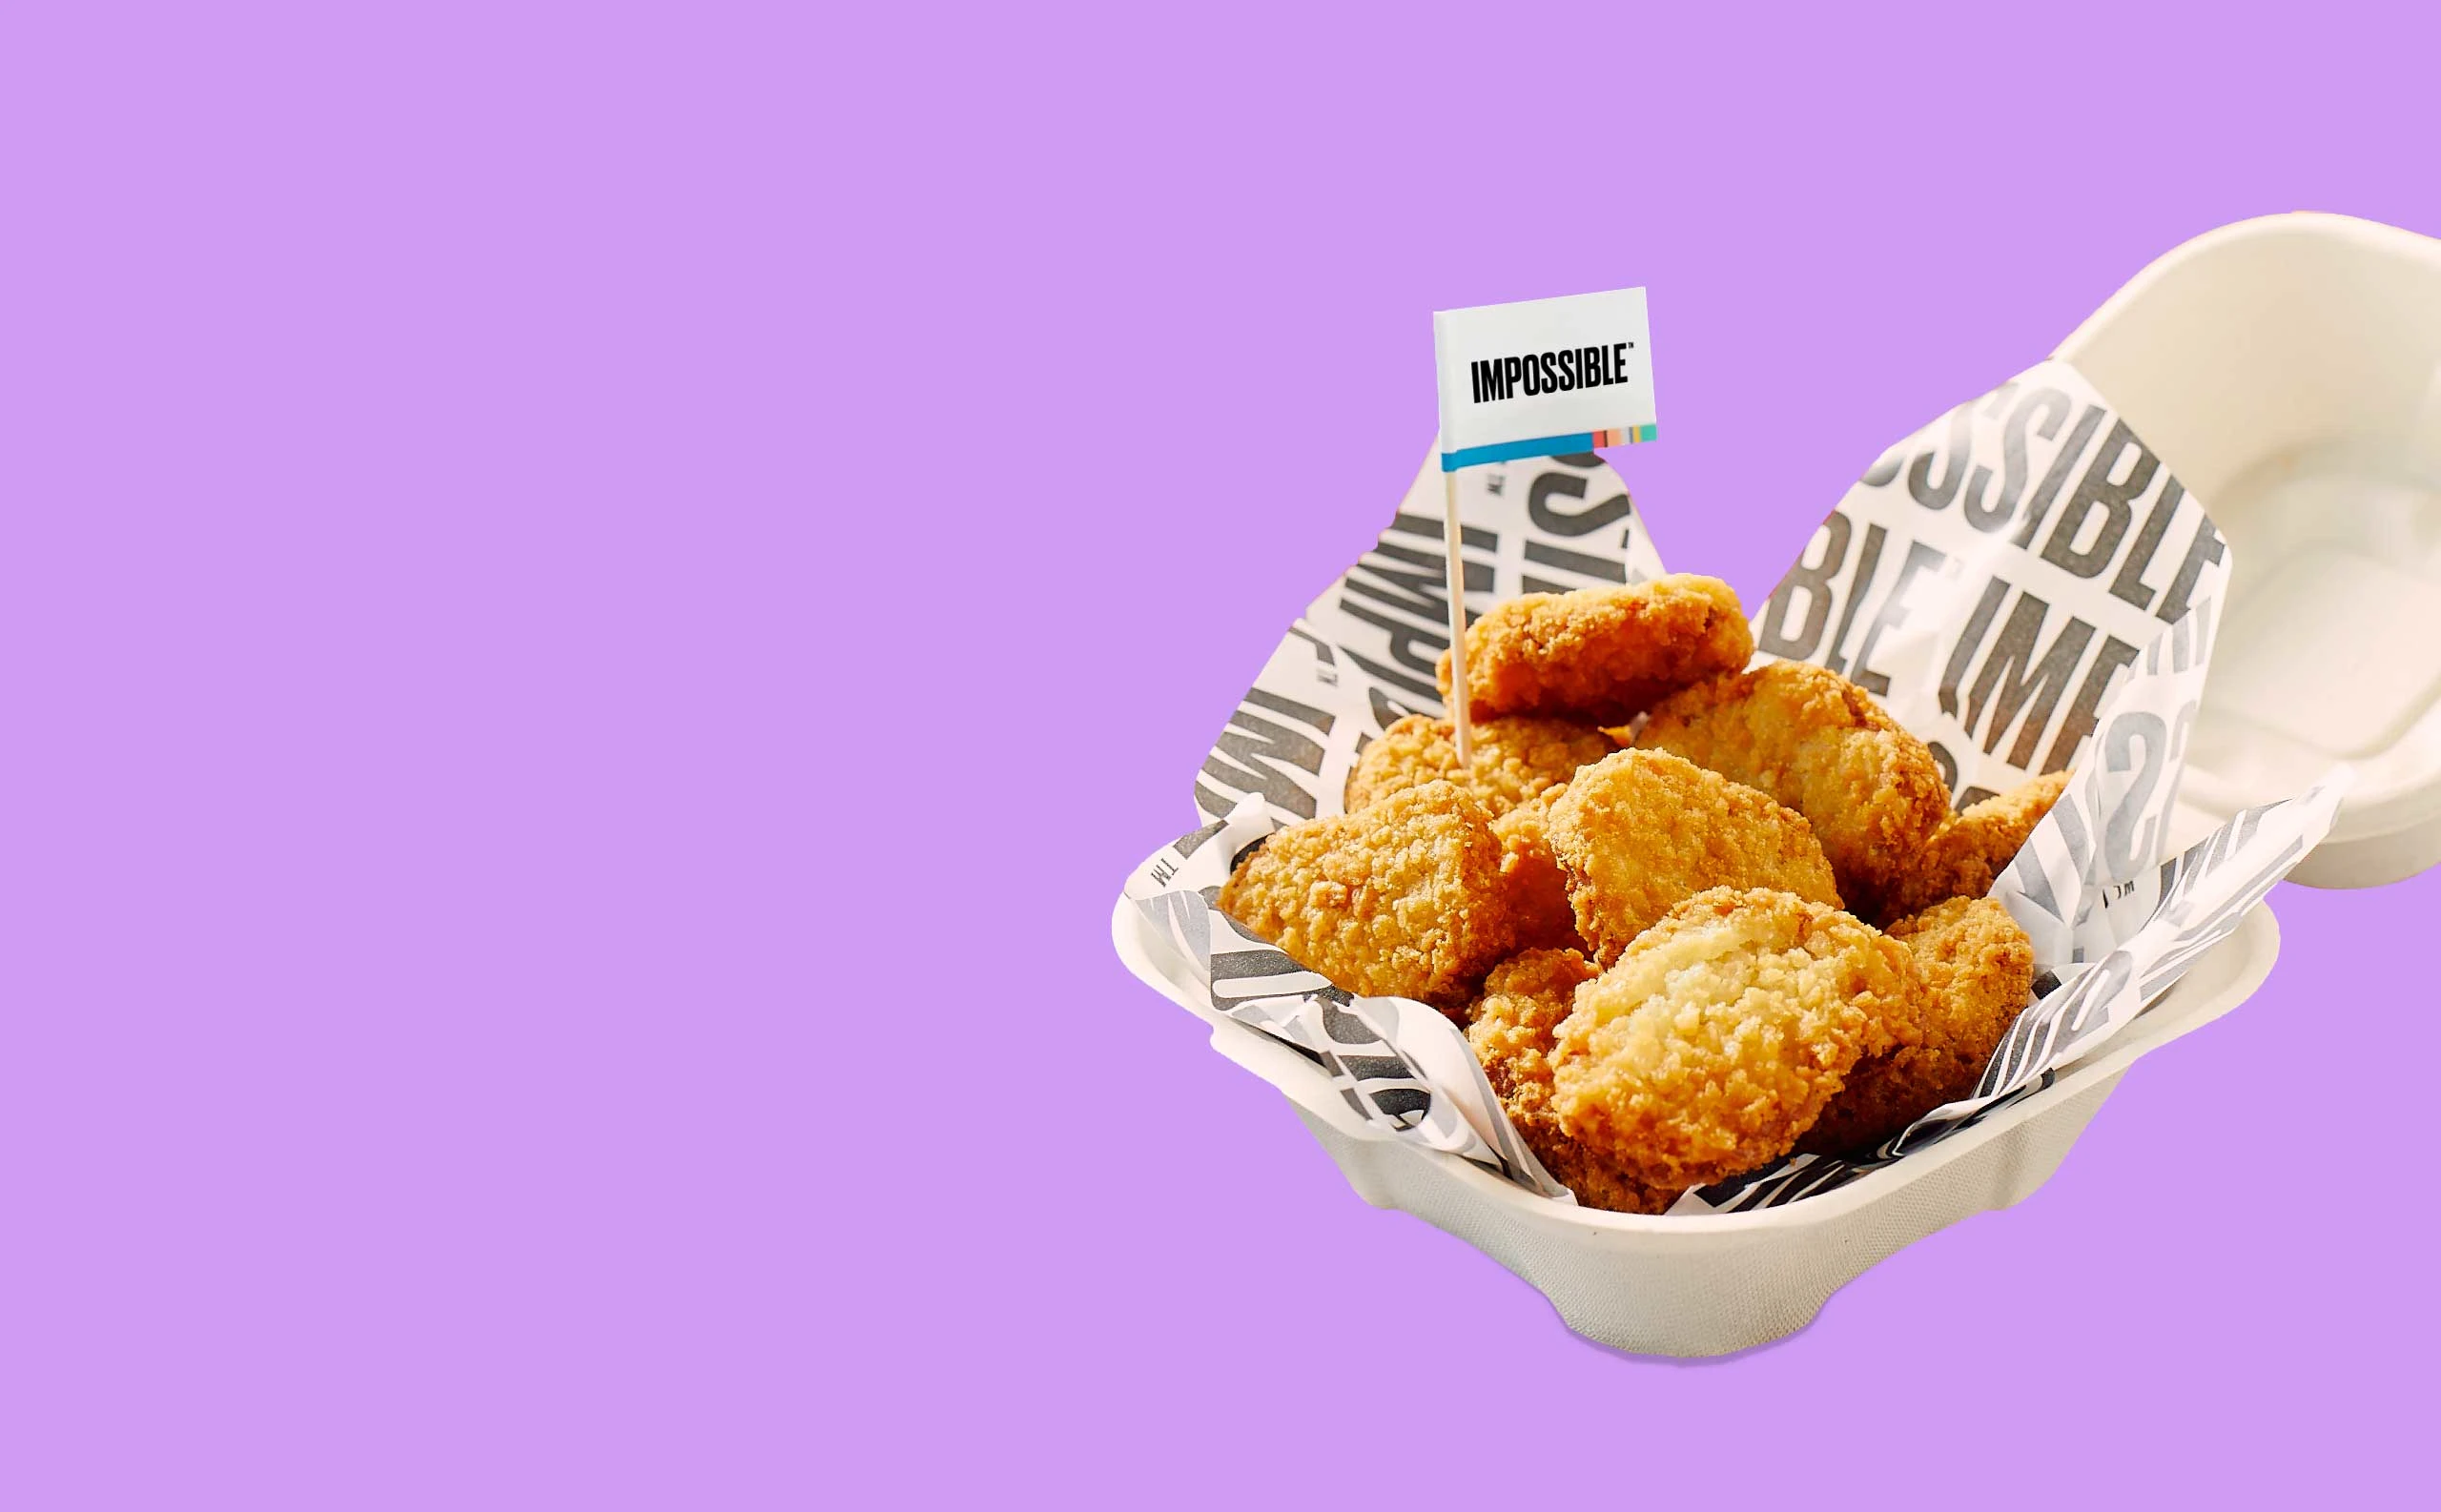 Impossible Chicken Nuggets with an Impossible toothpick flag in a takeout container on a purple background